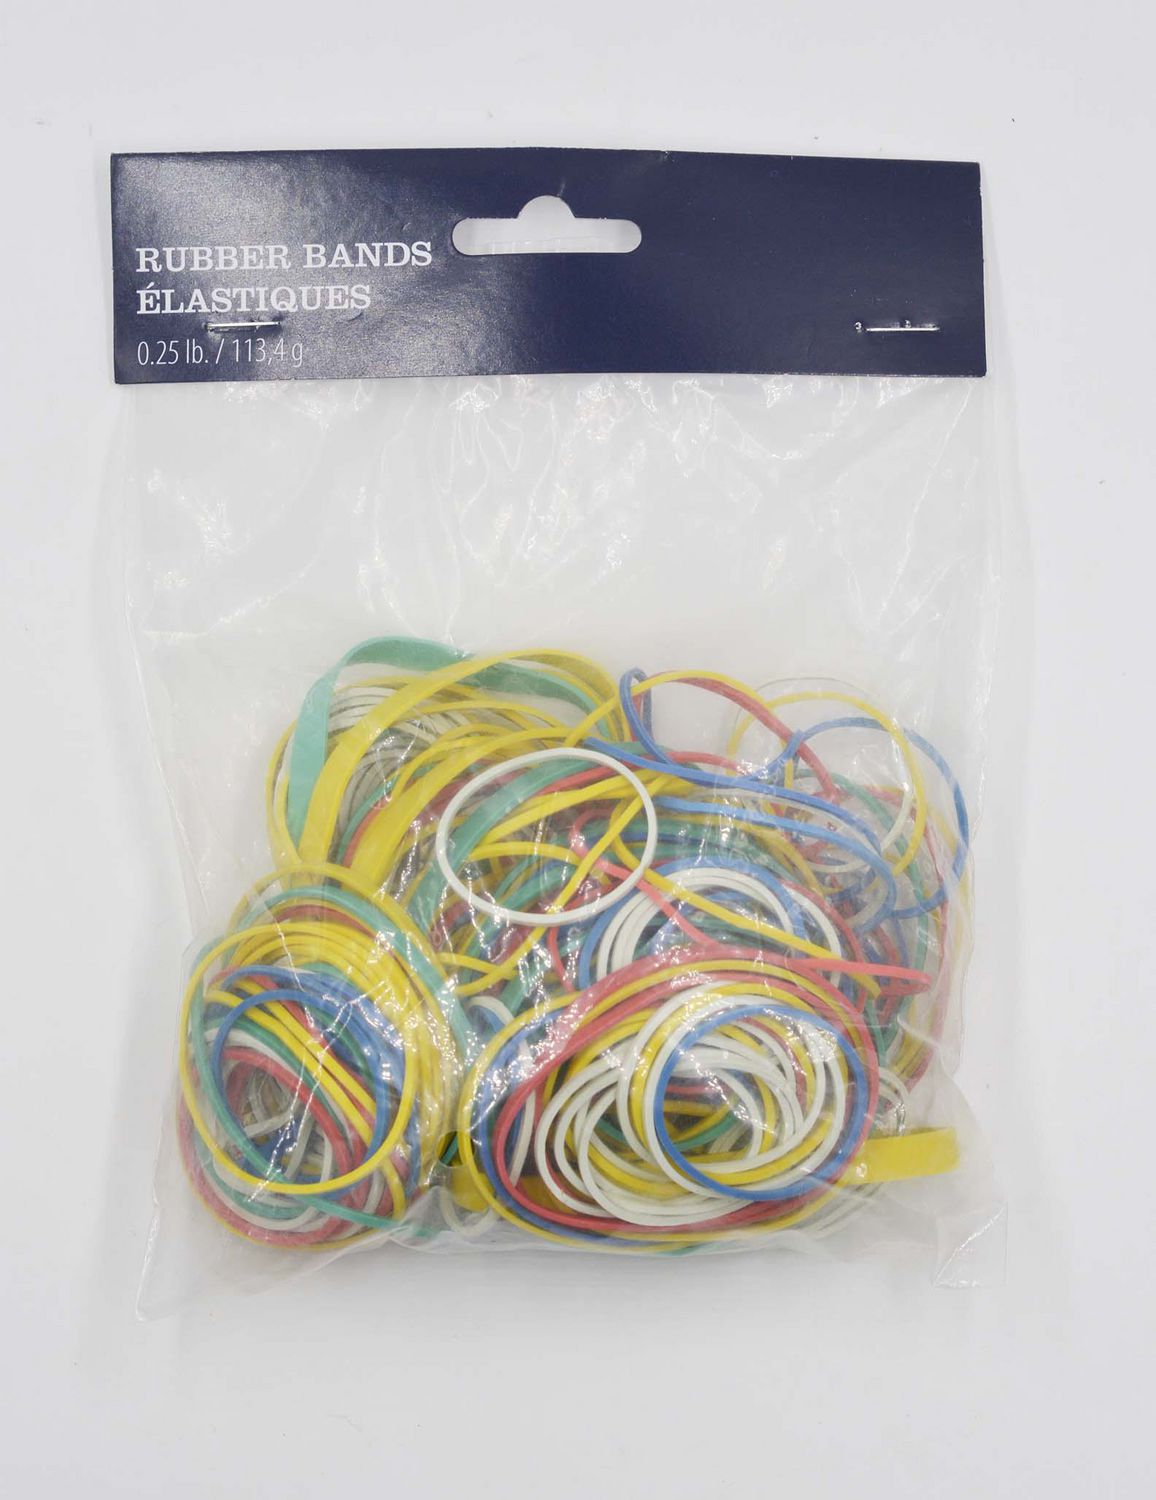 100 rubber bands